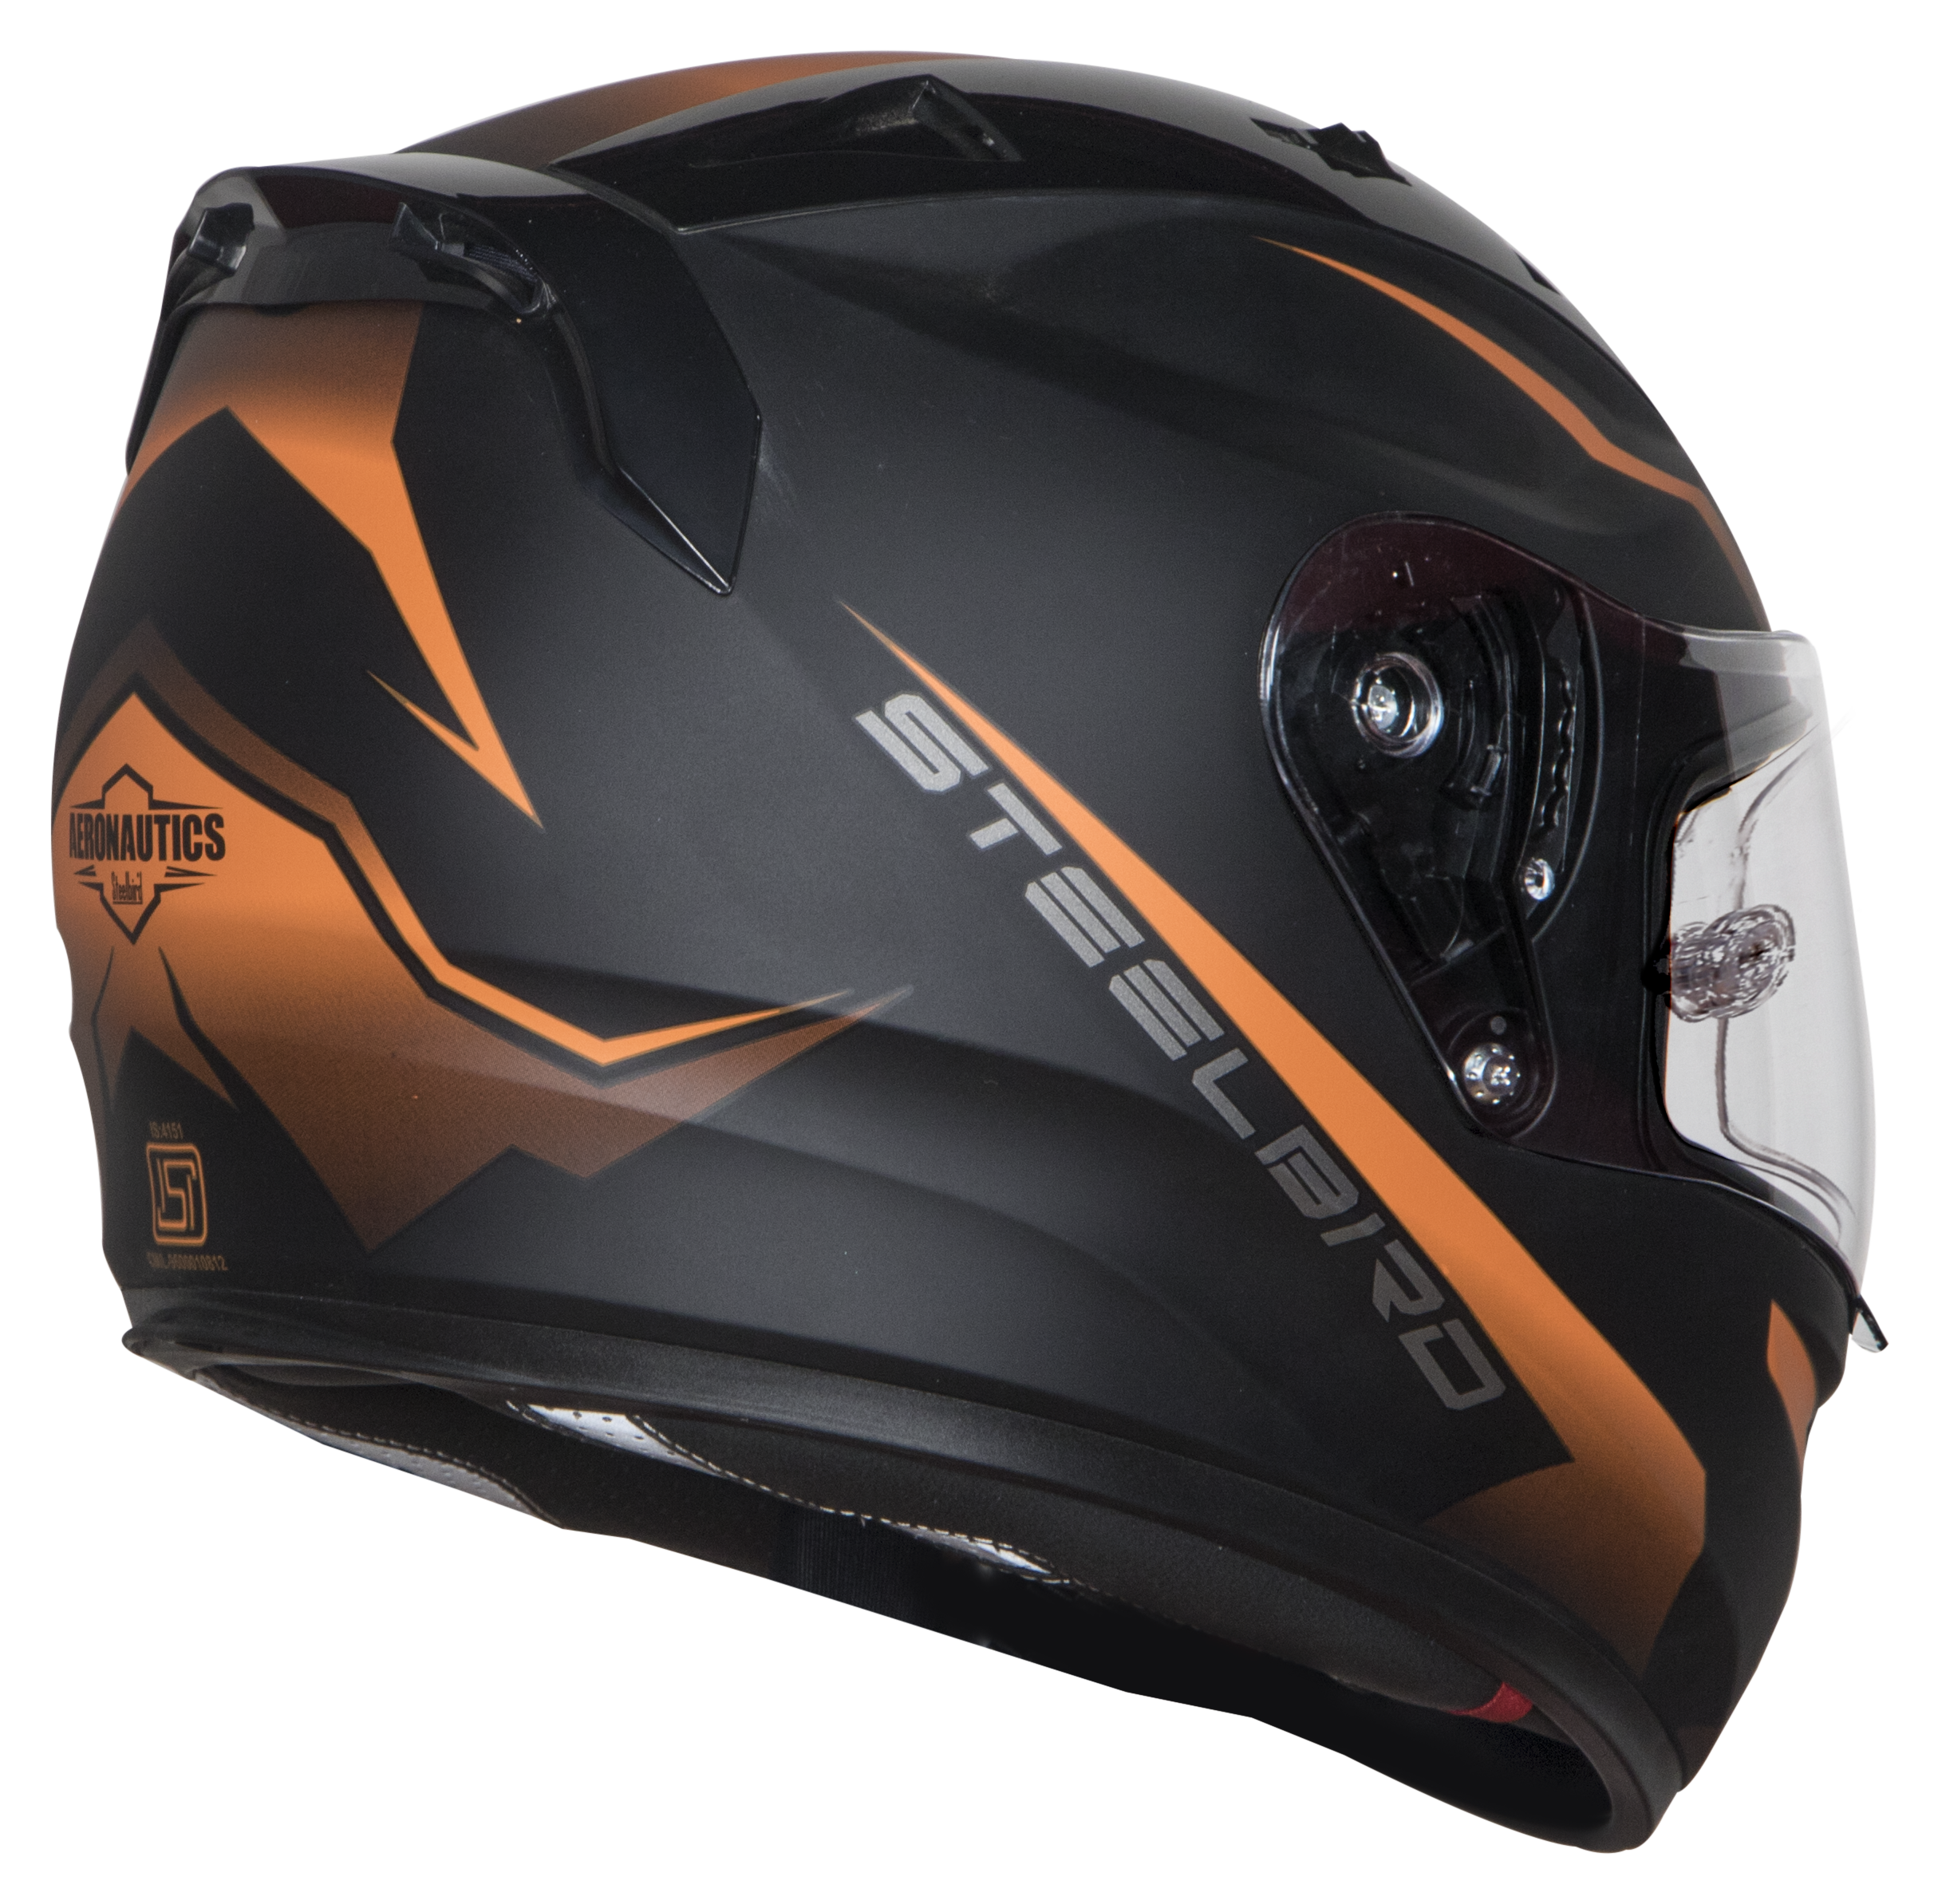 SA-1 WHIF Mat Black/Orange (Fitted With Clear Visor Extra Anti-Fog Shield Night Vision Gold Visor Free)